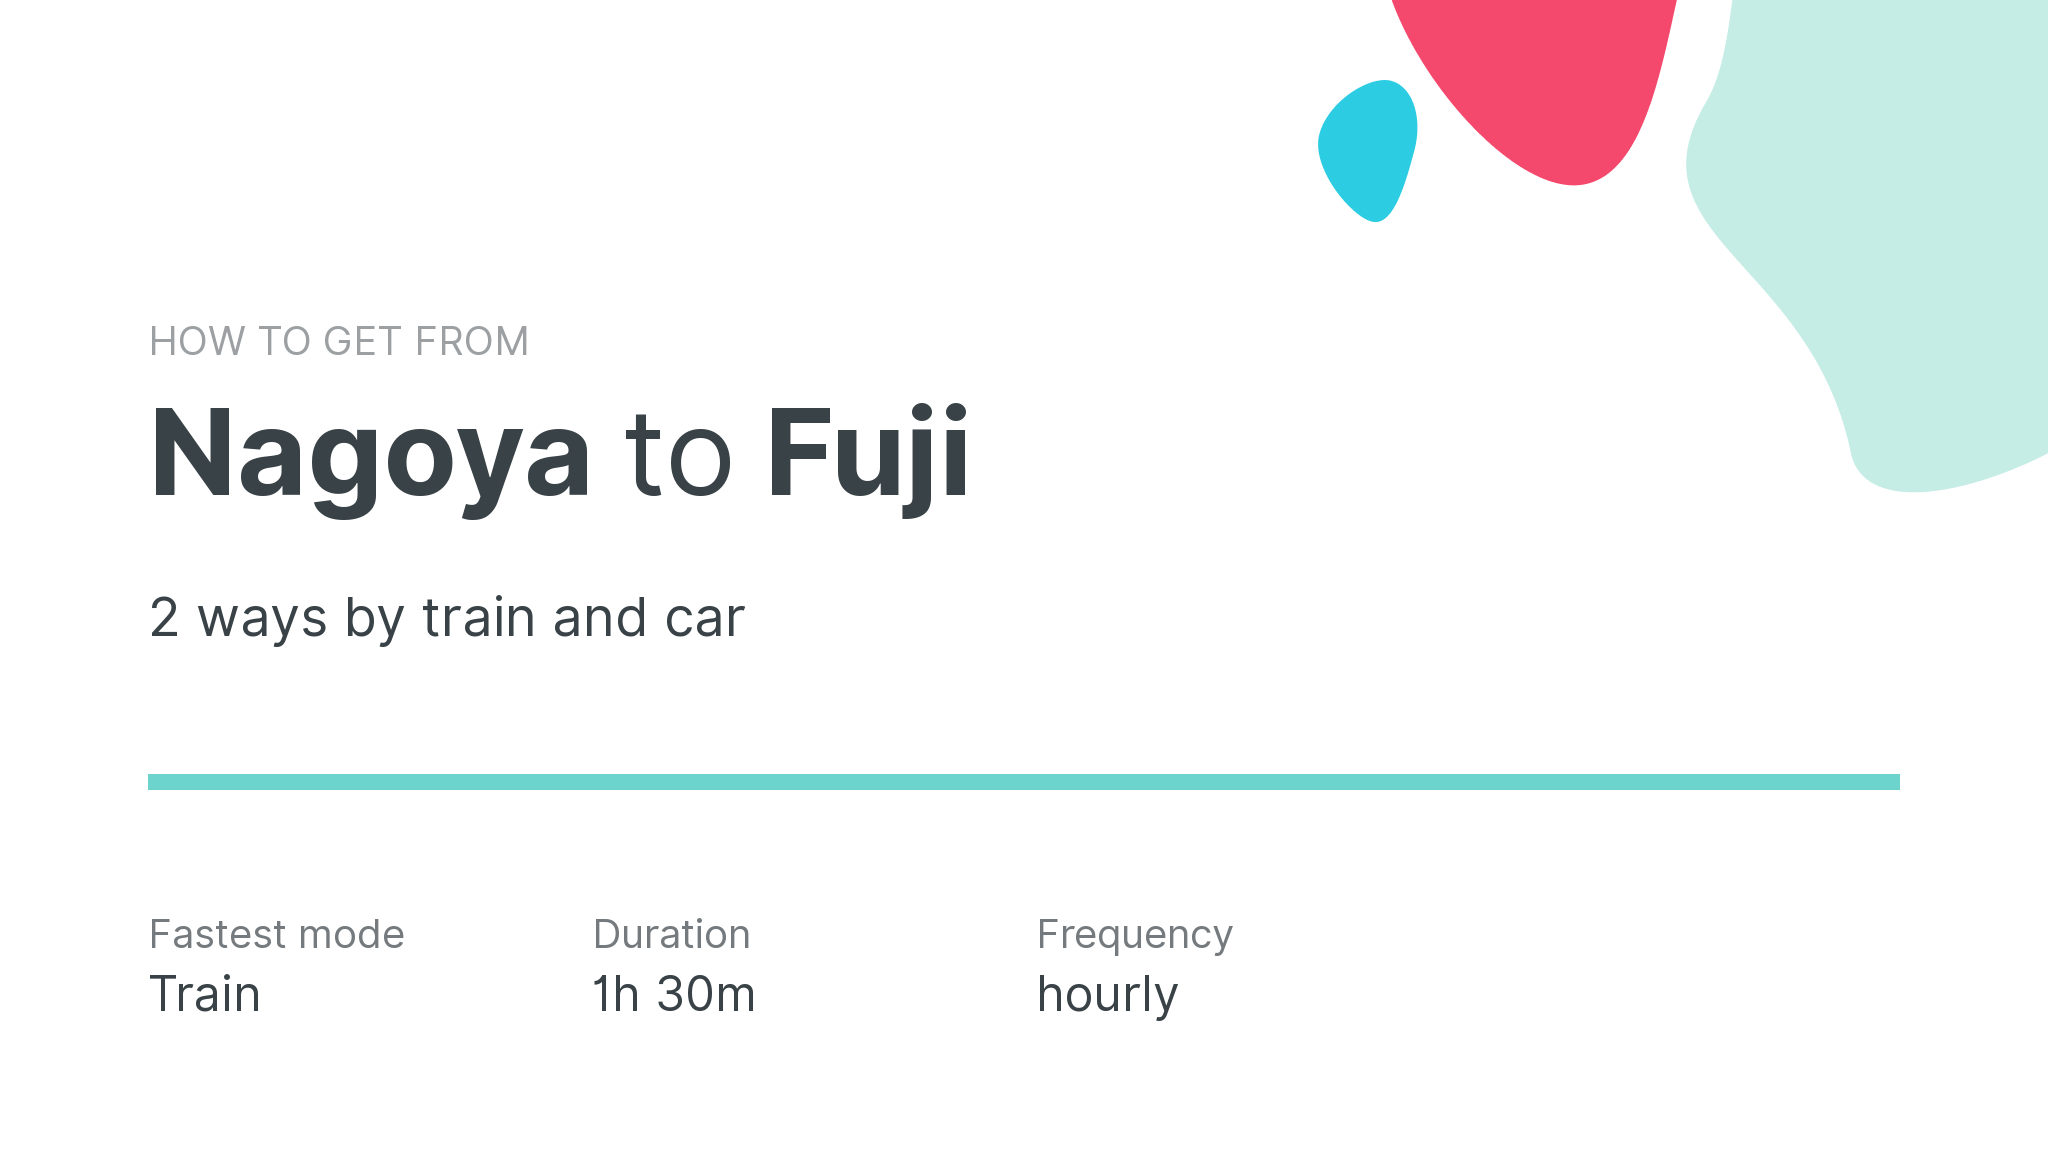 How do I get from Nagoya to Fuji